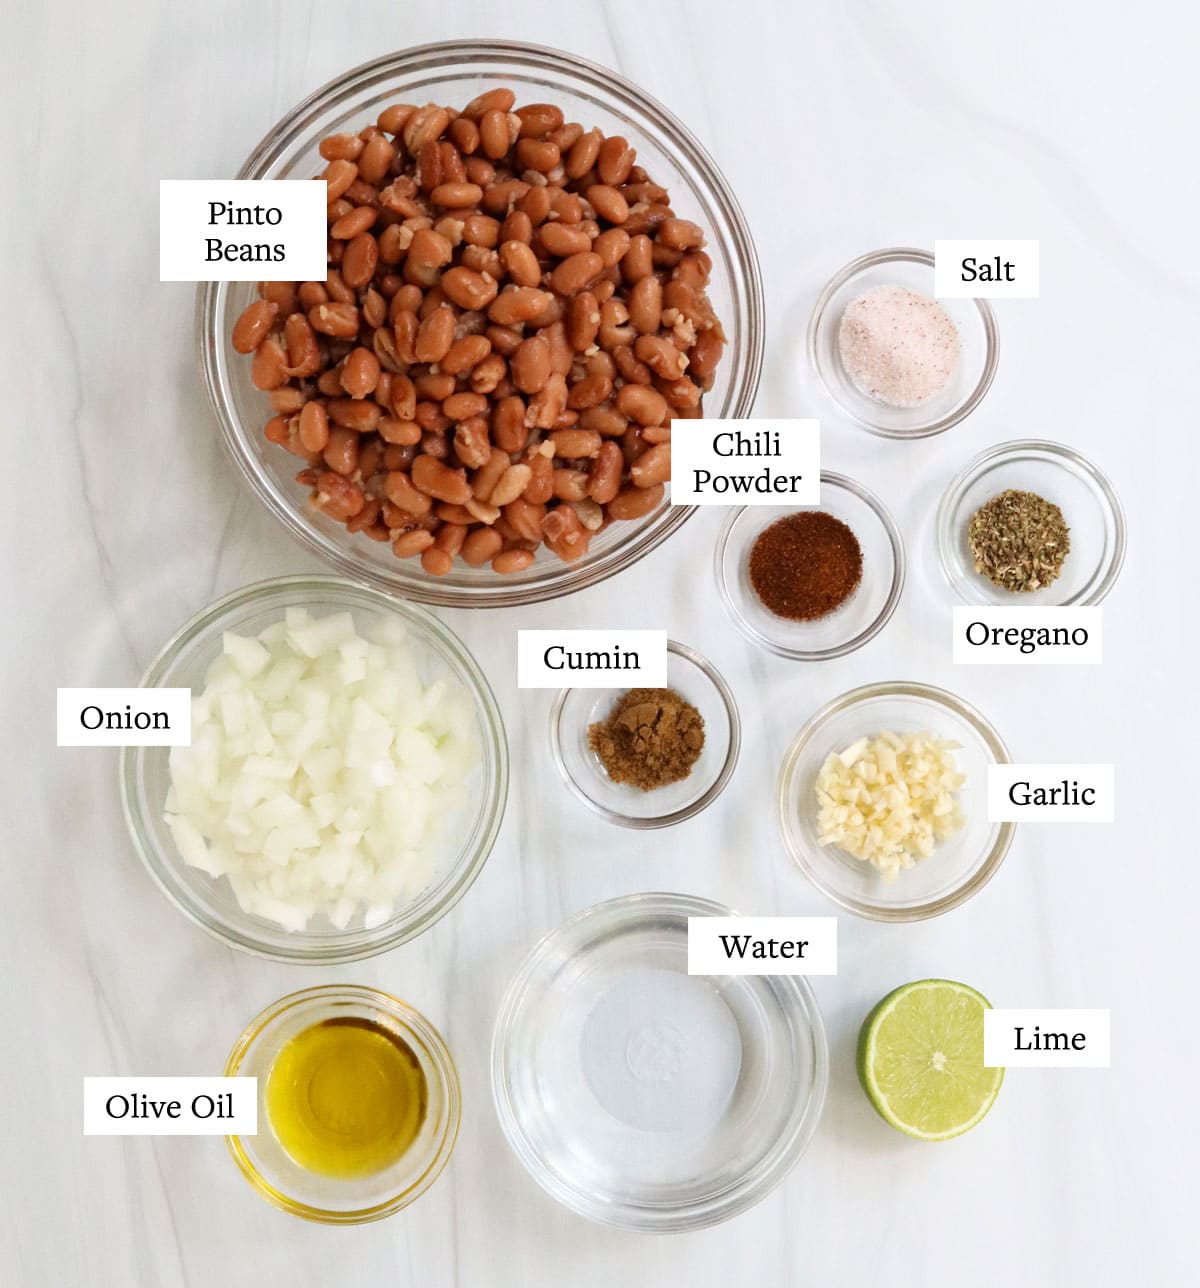 refried bean ingredients labeled on white surface.